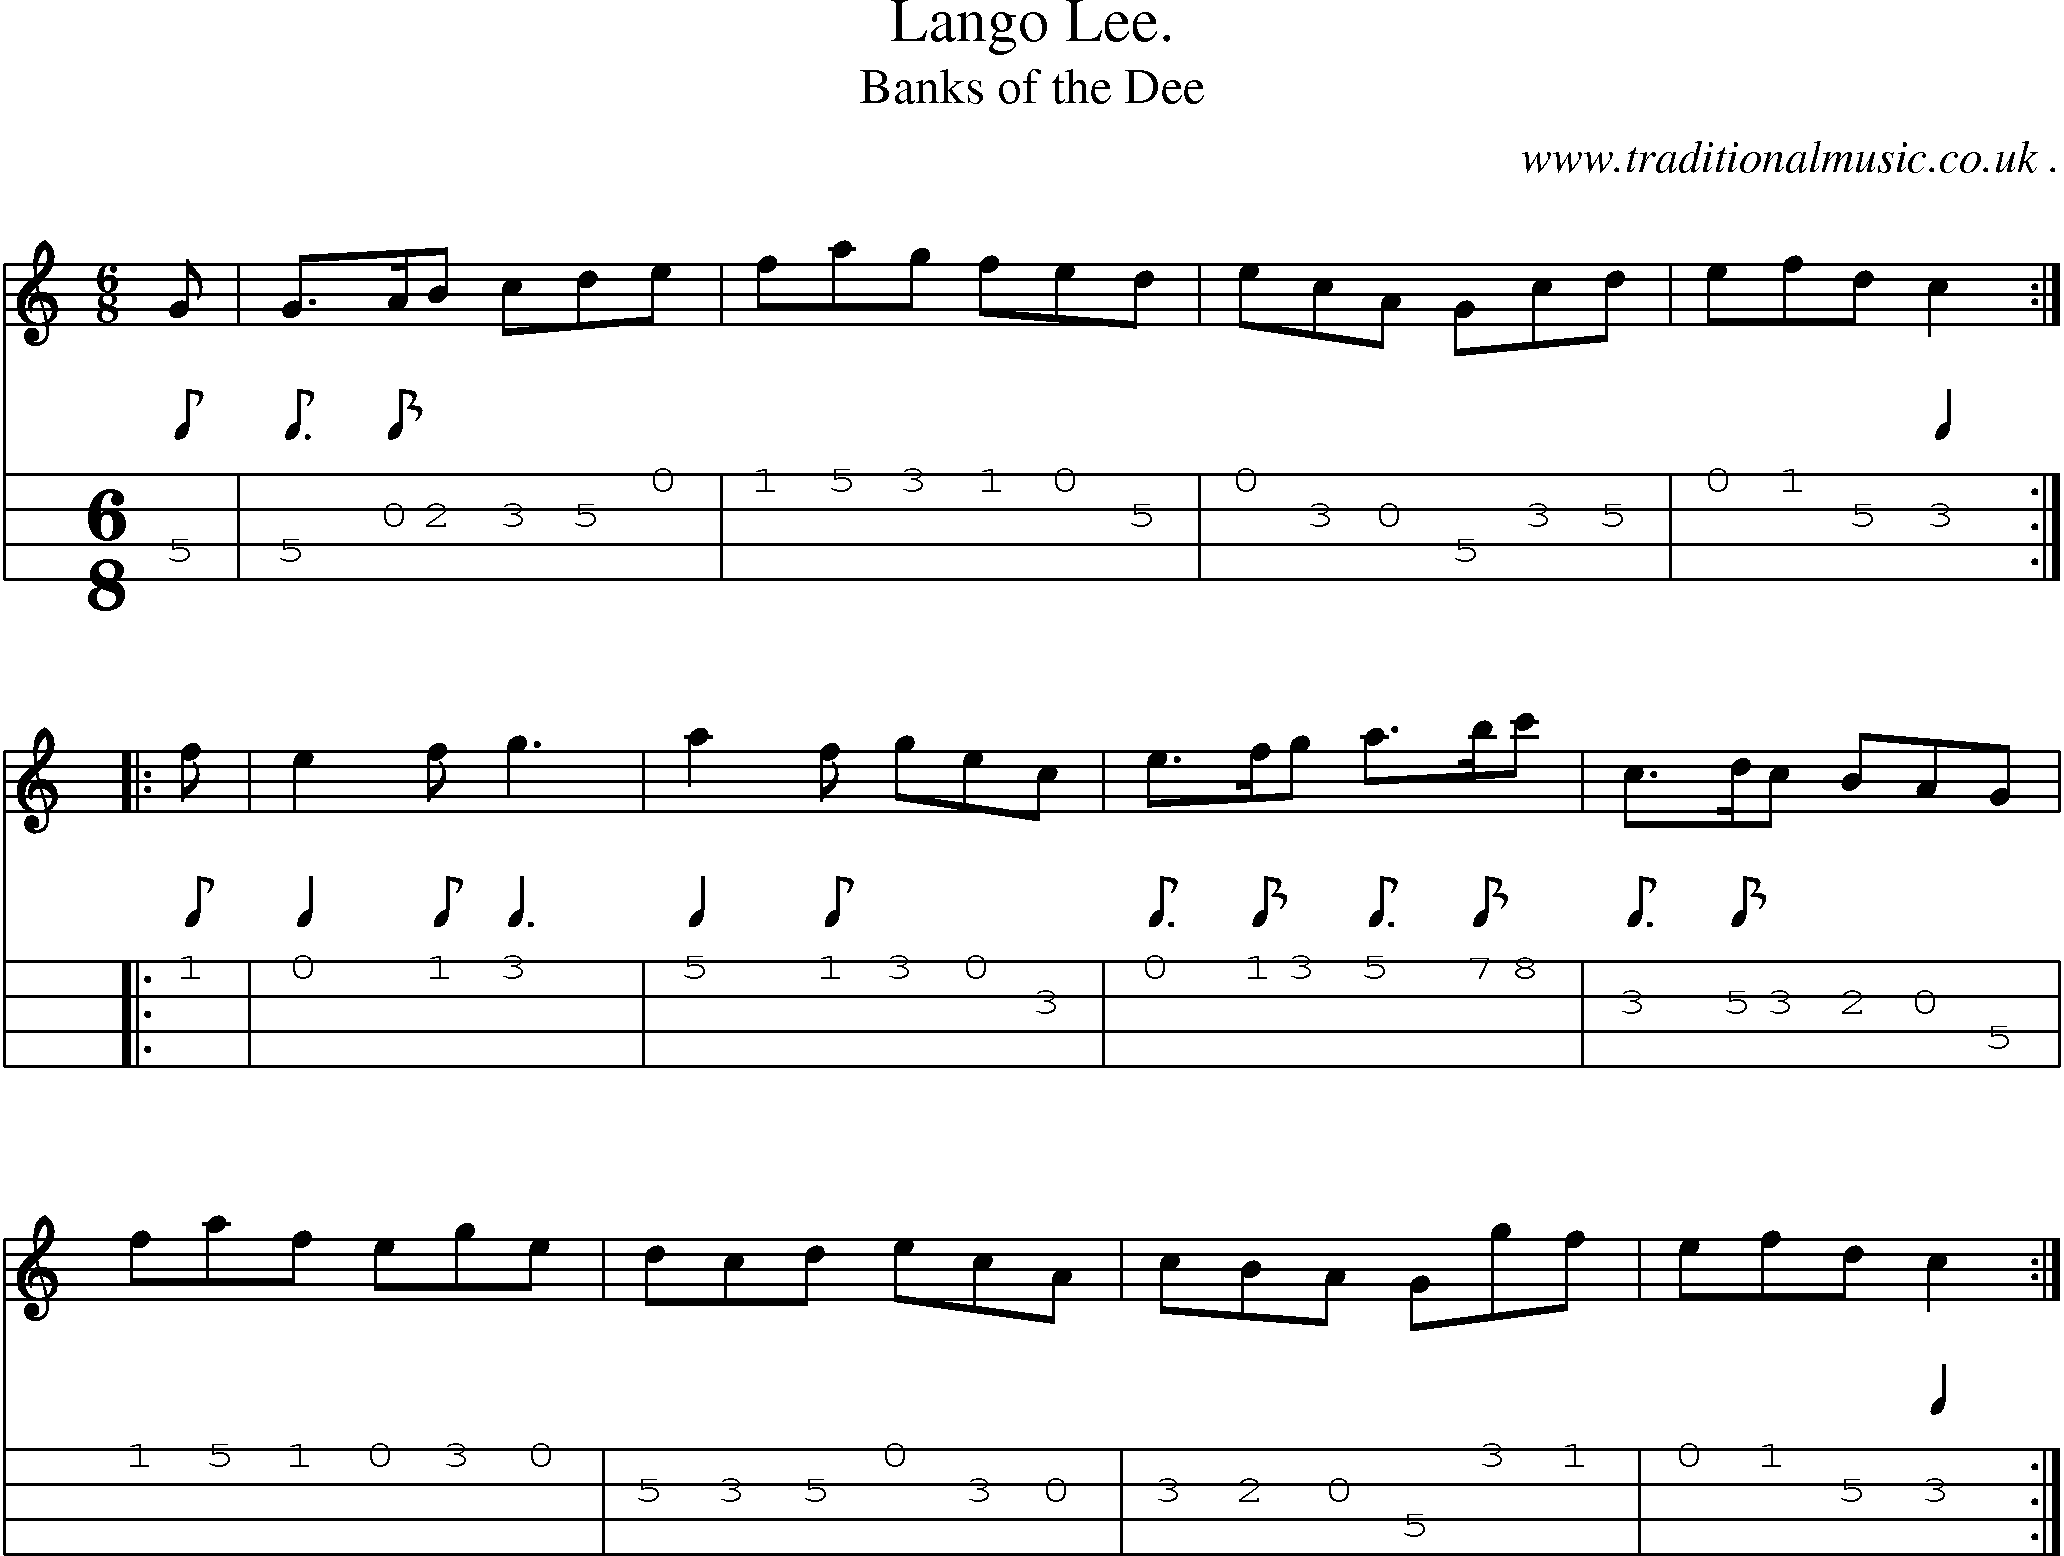 Sheet-Music and Mandolin Tabs for Lango Lee 